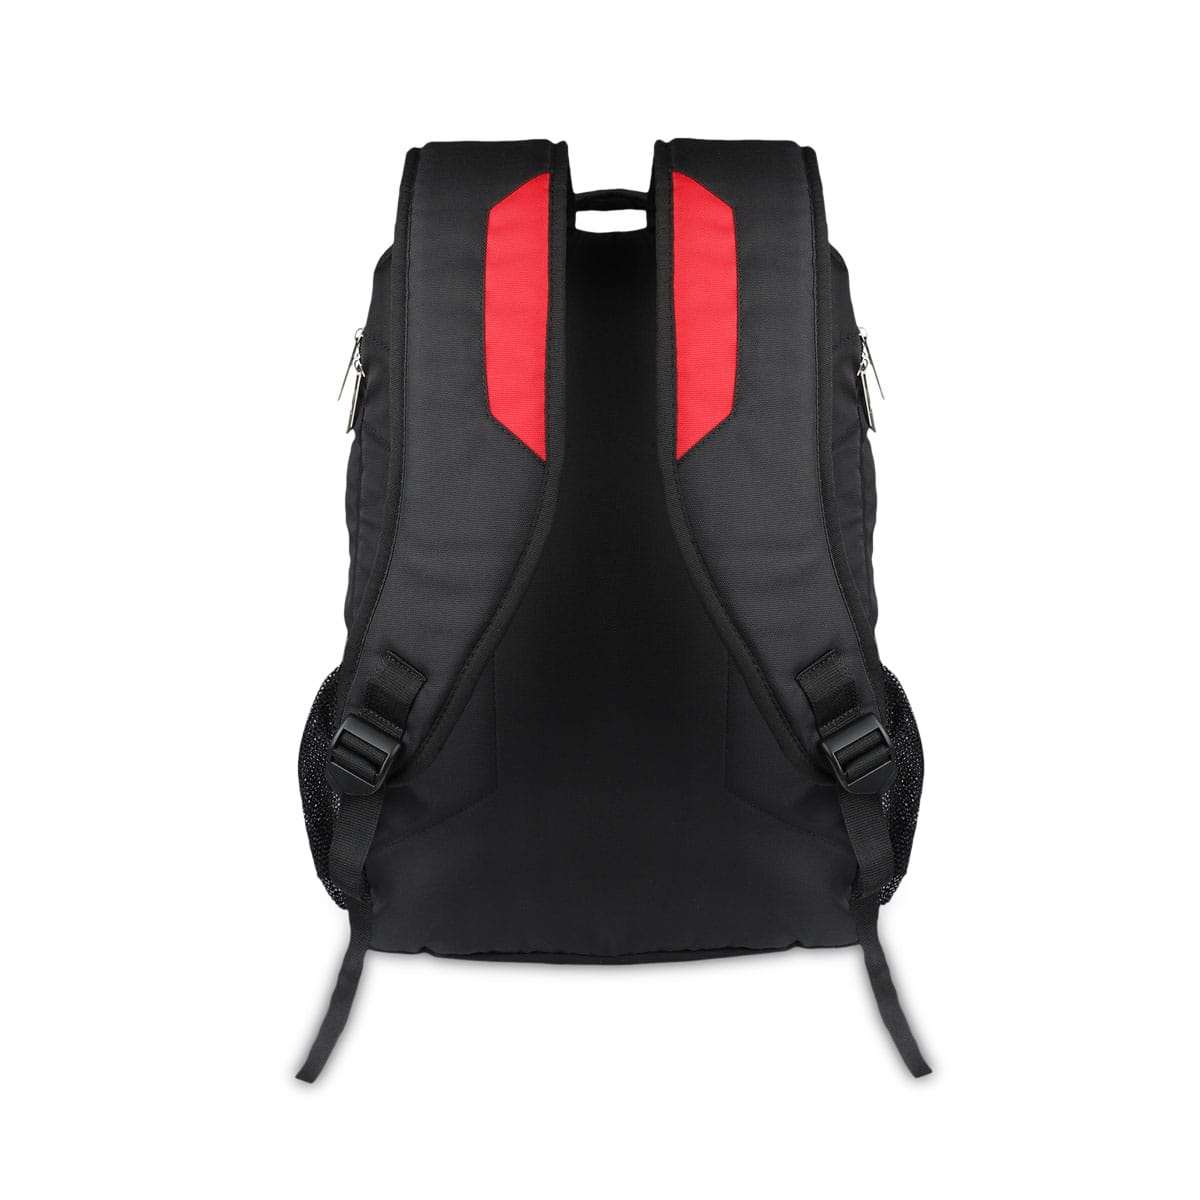 Black-Red | Protecta Harmony Laptop Backpack-3